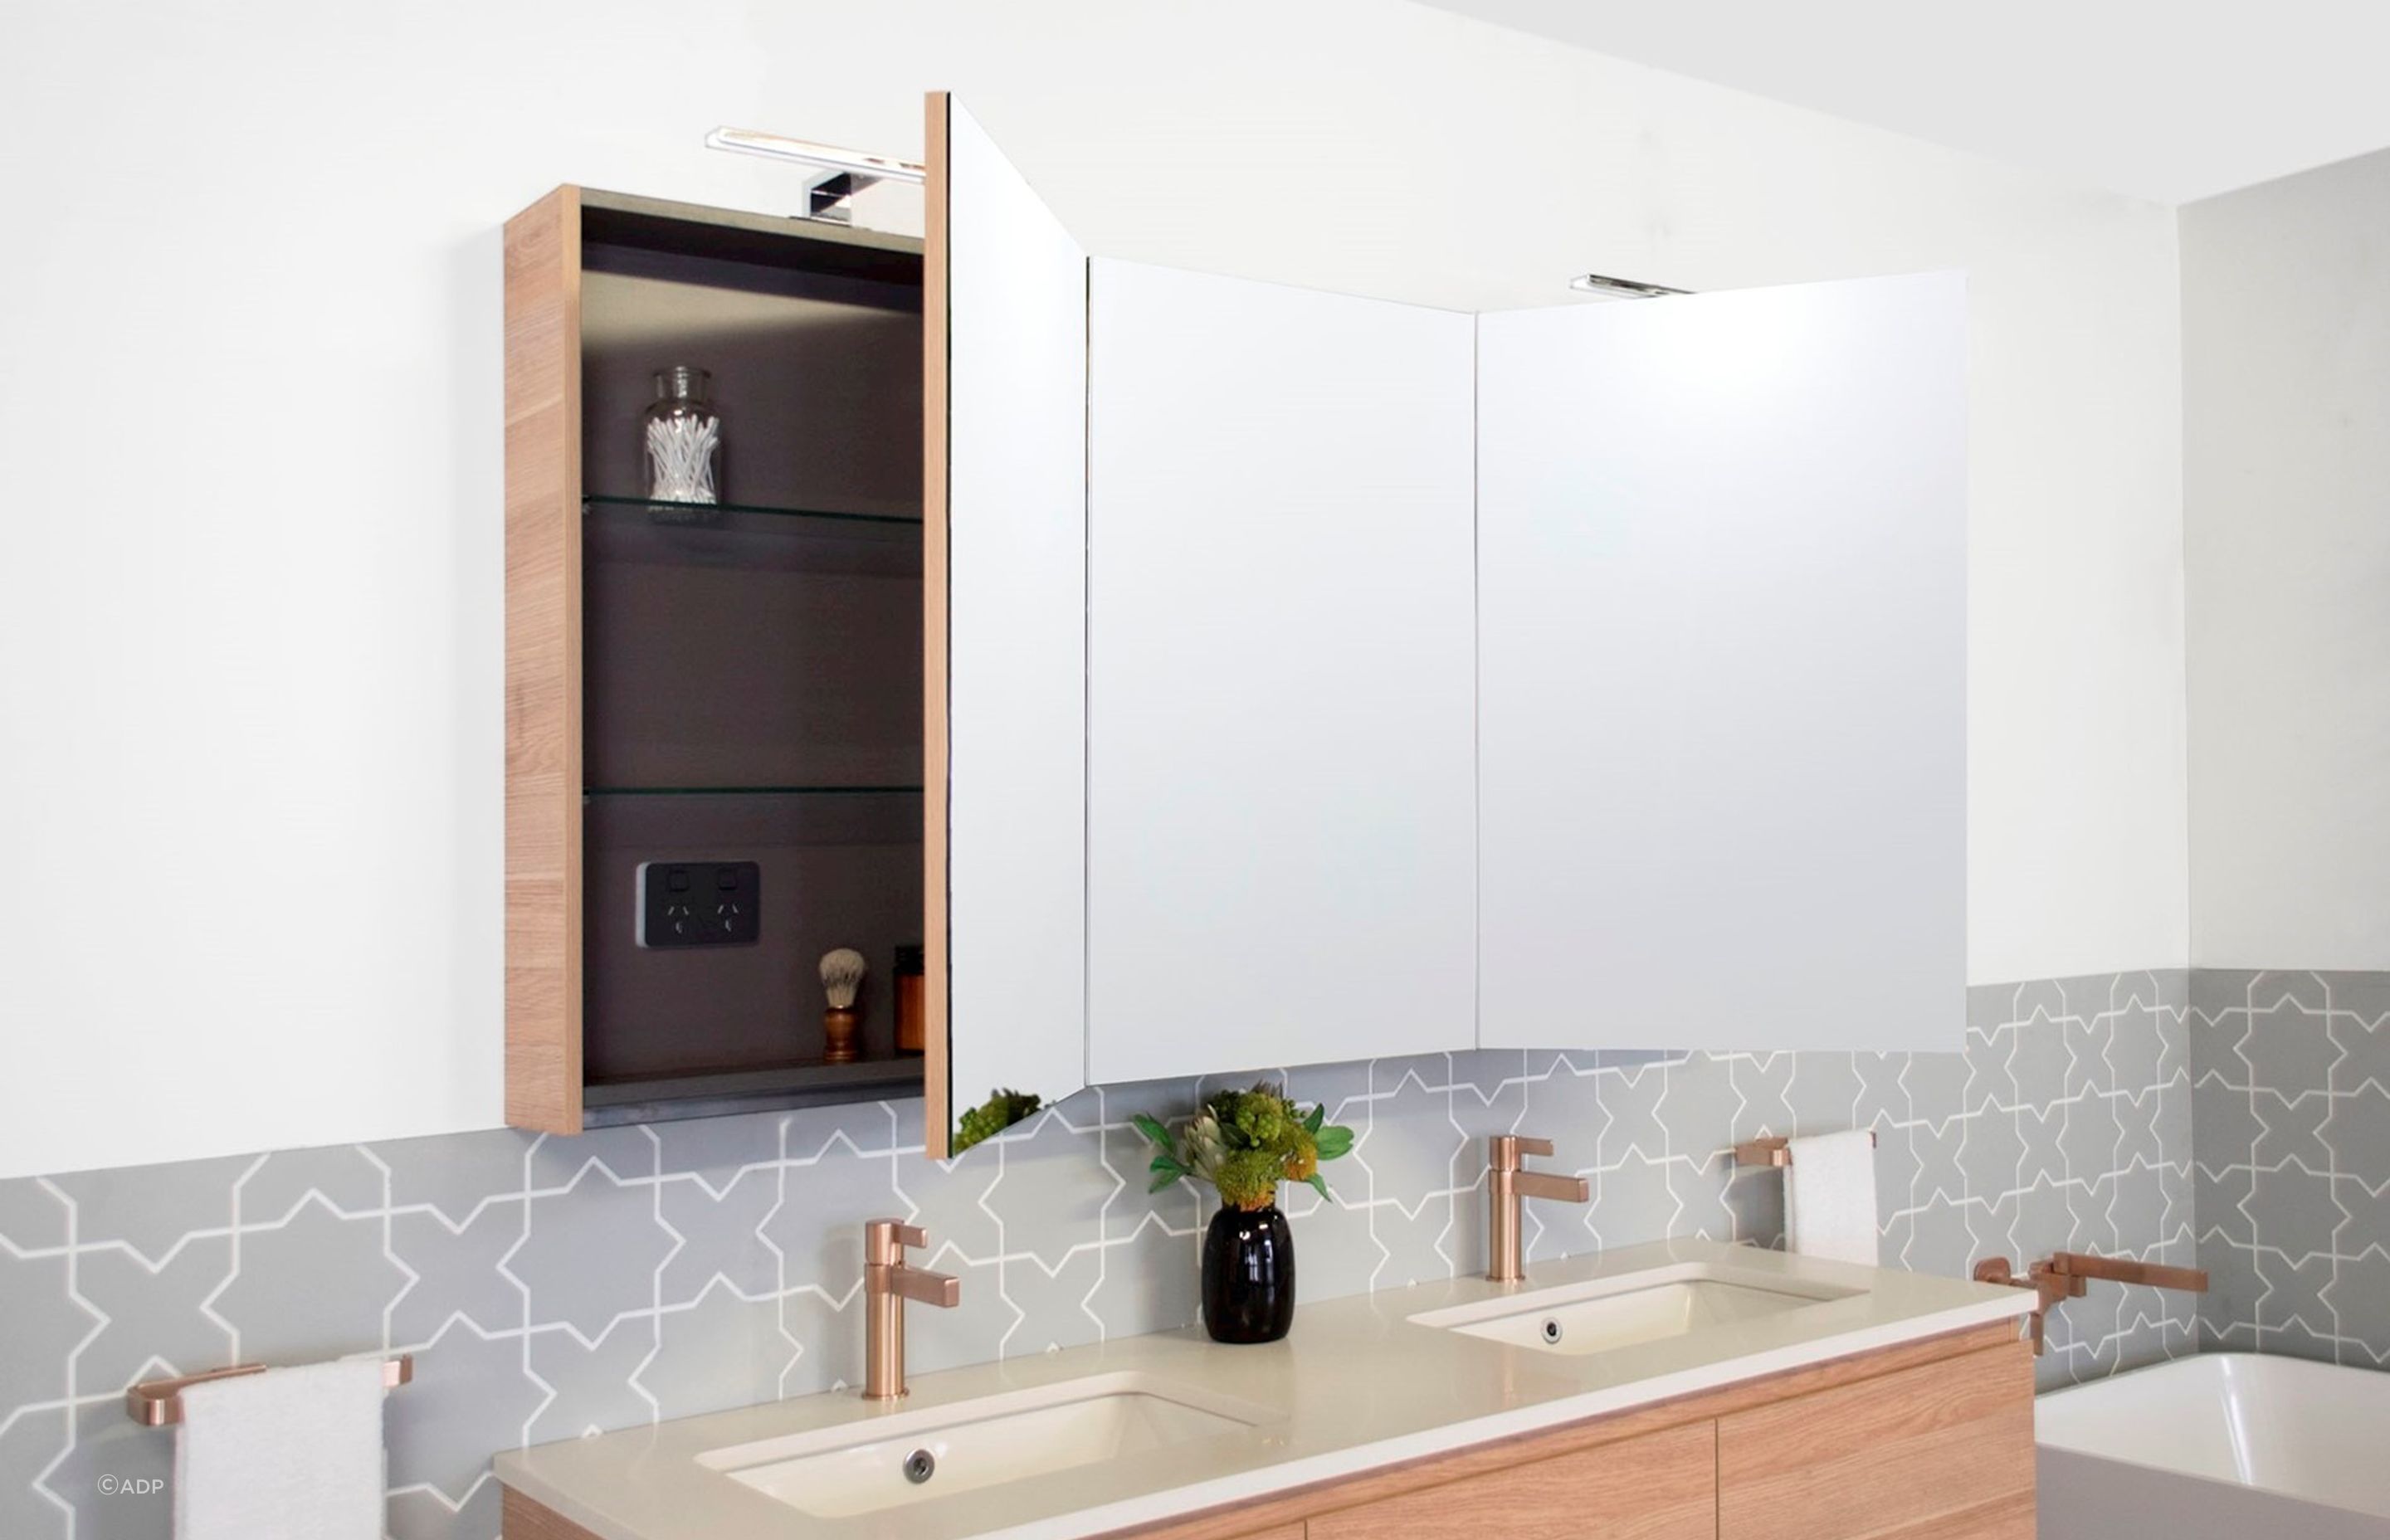 Medicine cabinets come in all shapes and sizes. Featured Product: Moonlight Mirrored Cabinet by ADP